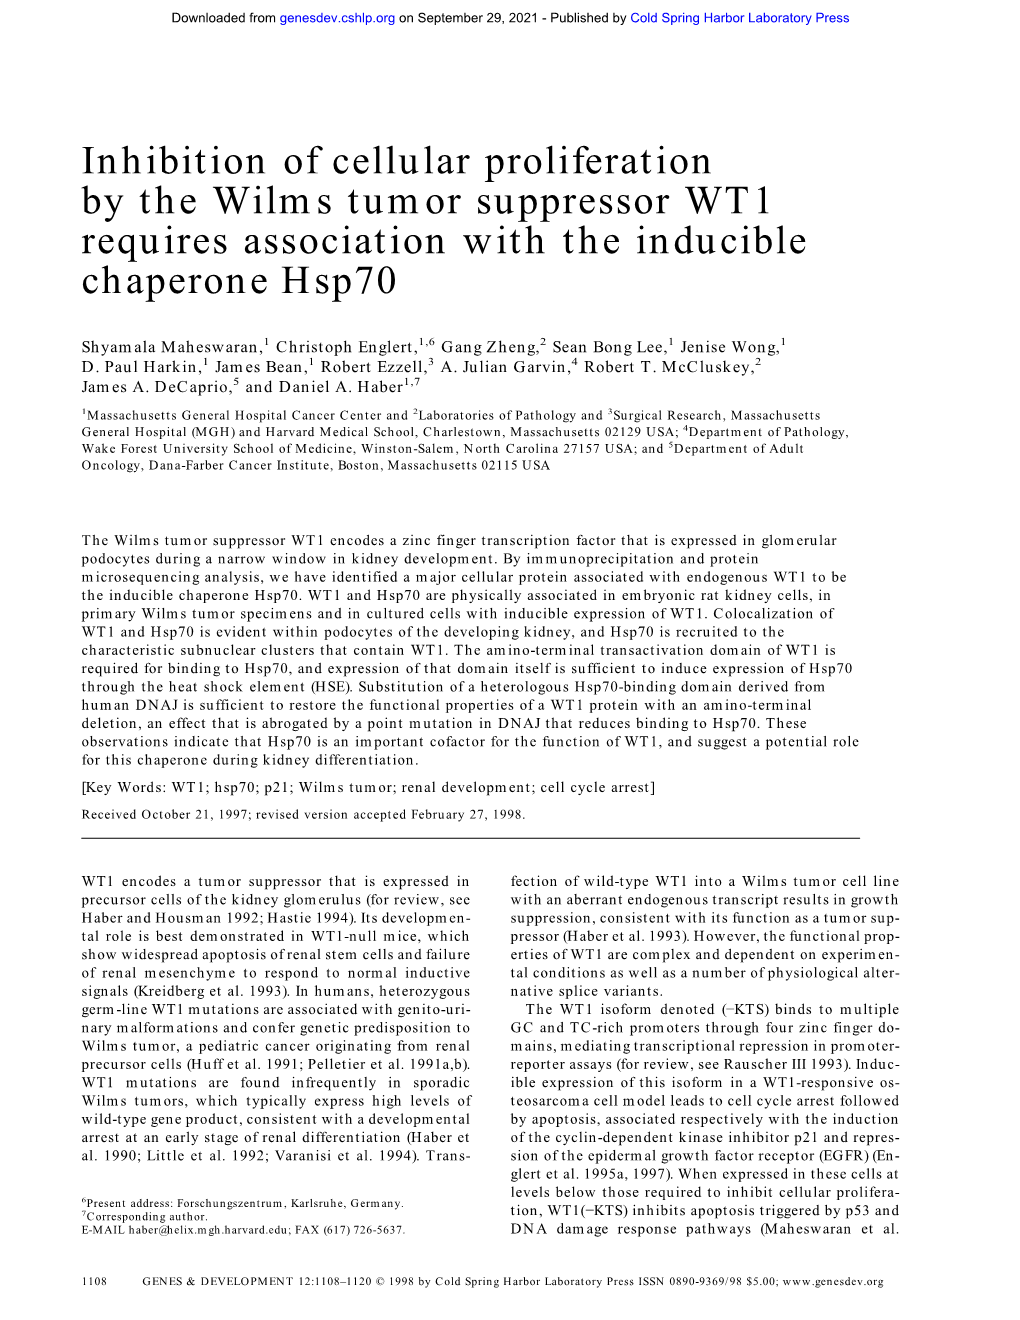 Inhibition of Cellular Proliferation by the Wilms Tumor Suppressor WT1 Requires Association with the Inducible Chaperone Hsp70